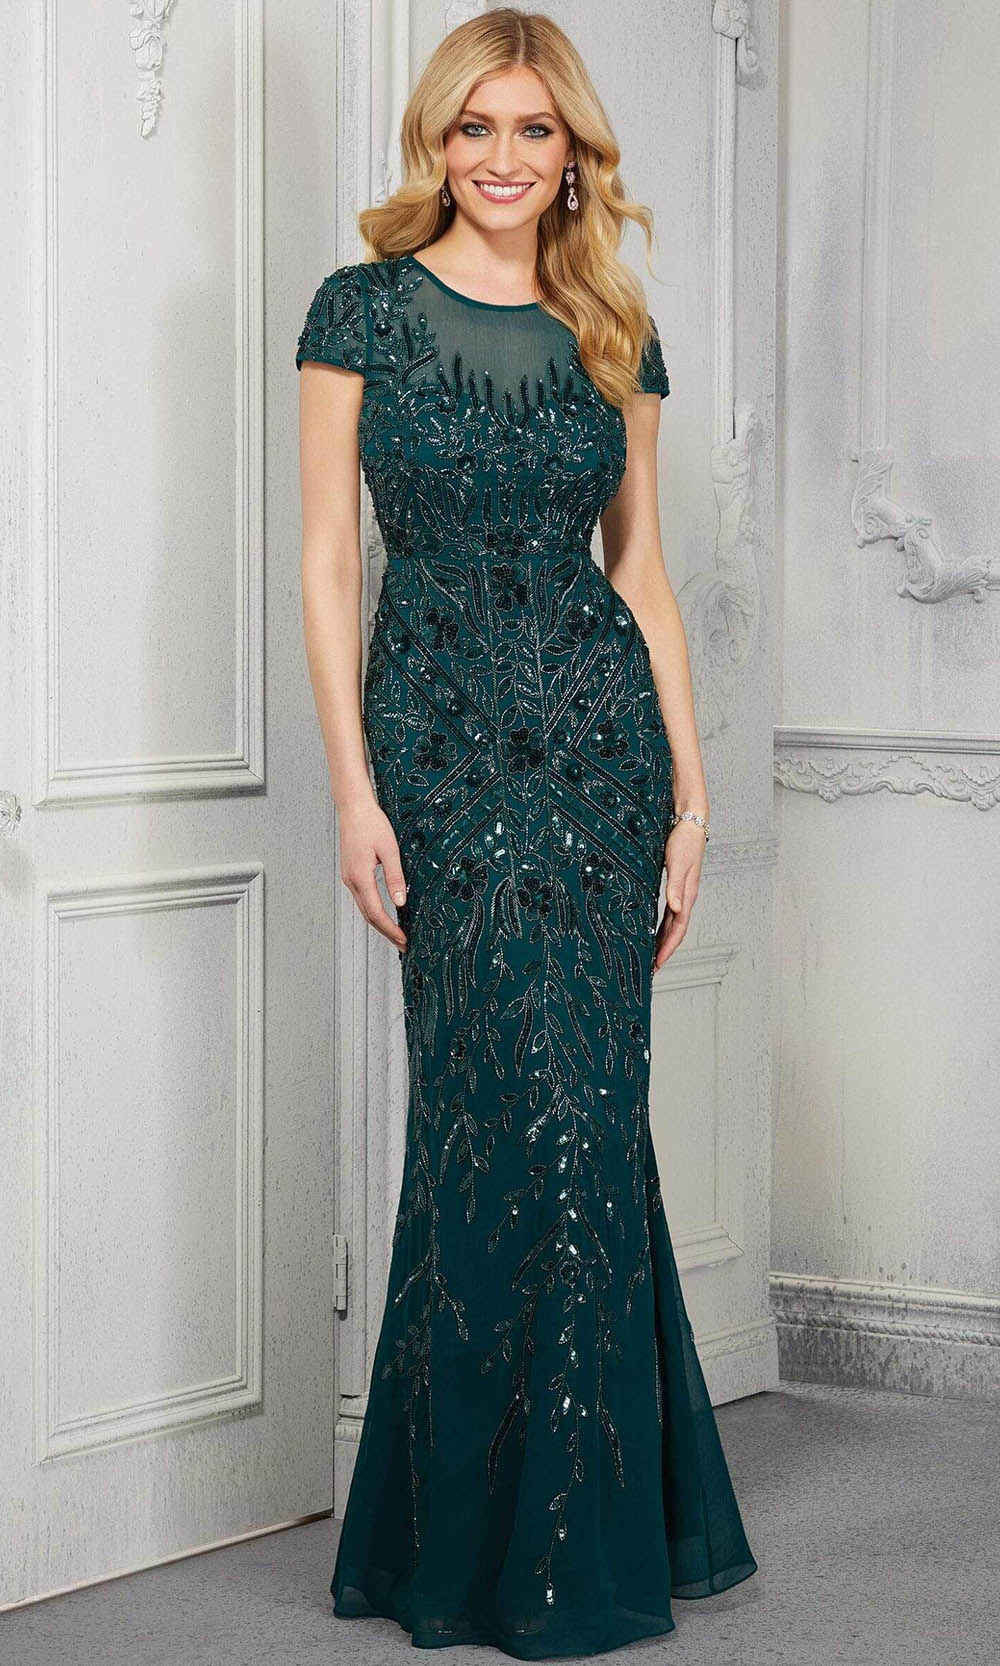 Image of MGNY By Mori Lee - 72426 Leaf Motif Beaded Formal Evening Dress